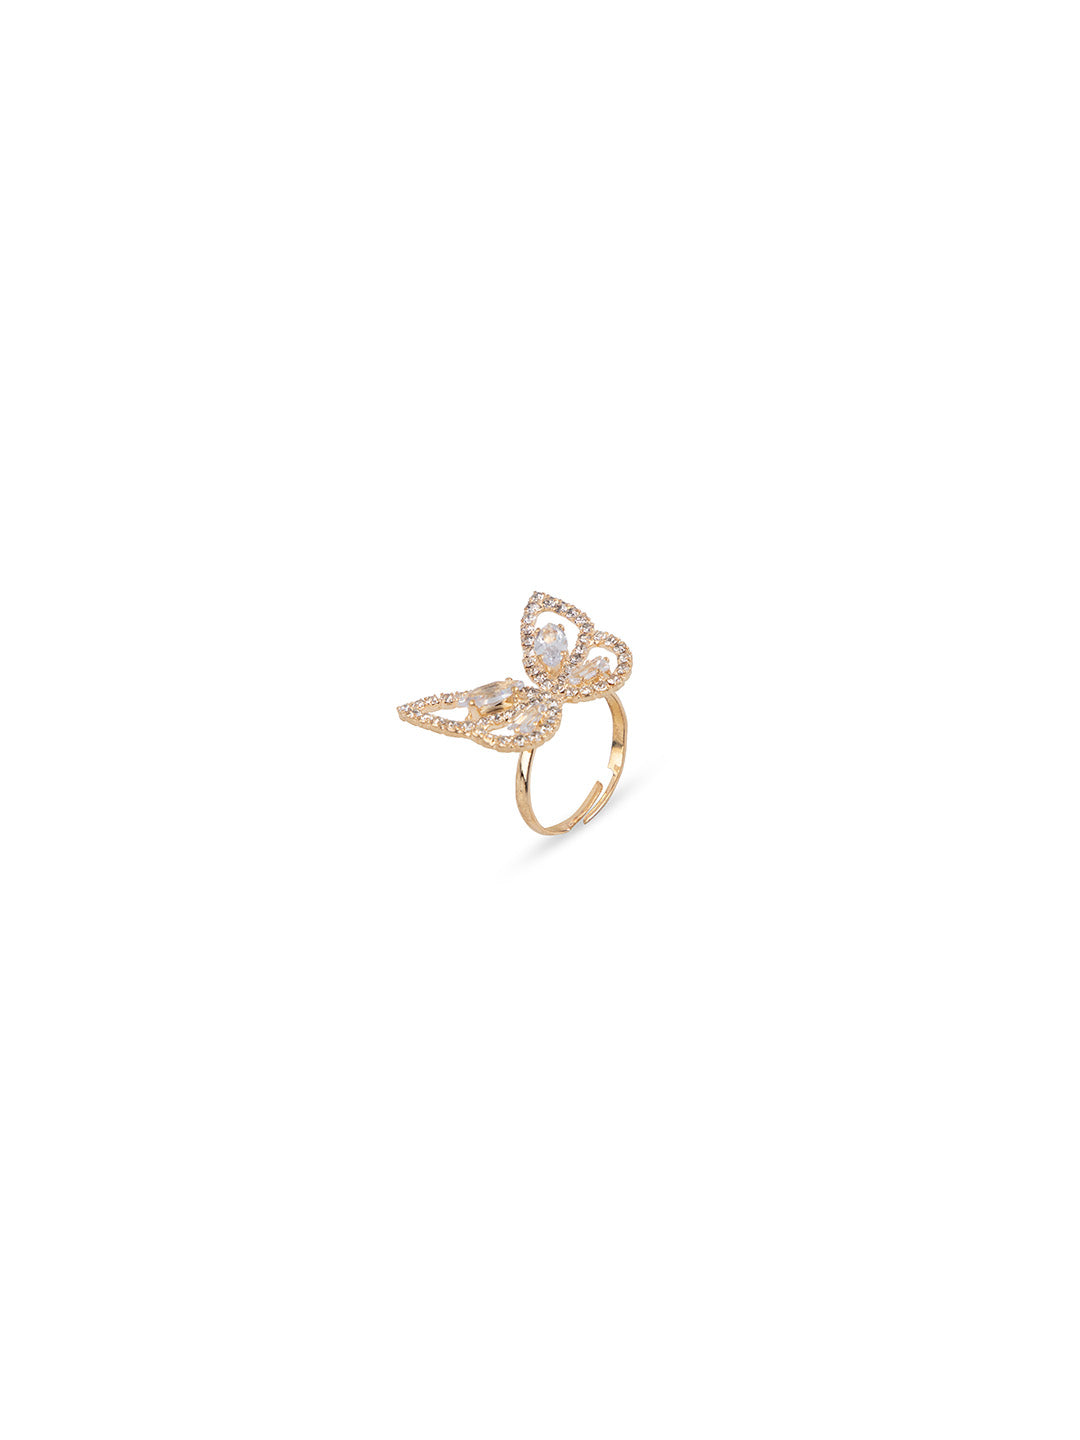 Priyaasi Stone Studded Butterly Ring Set of 3